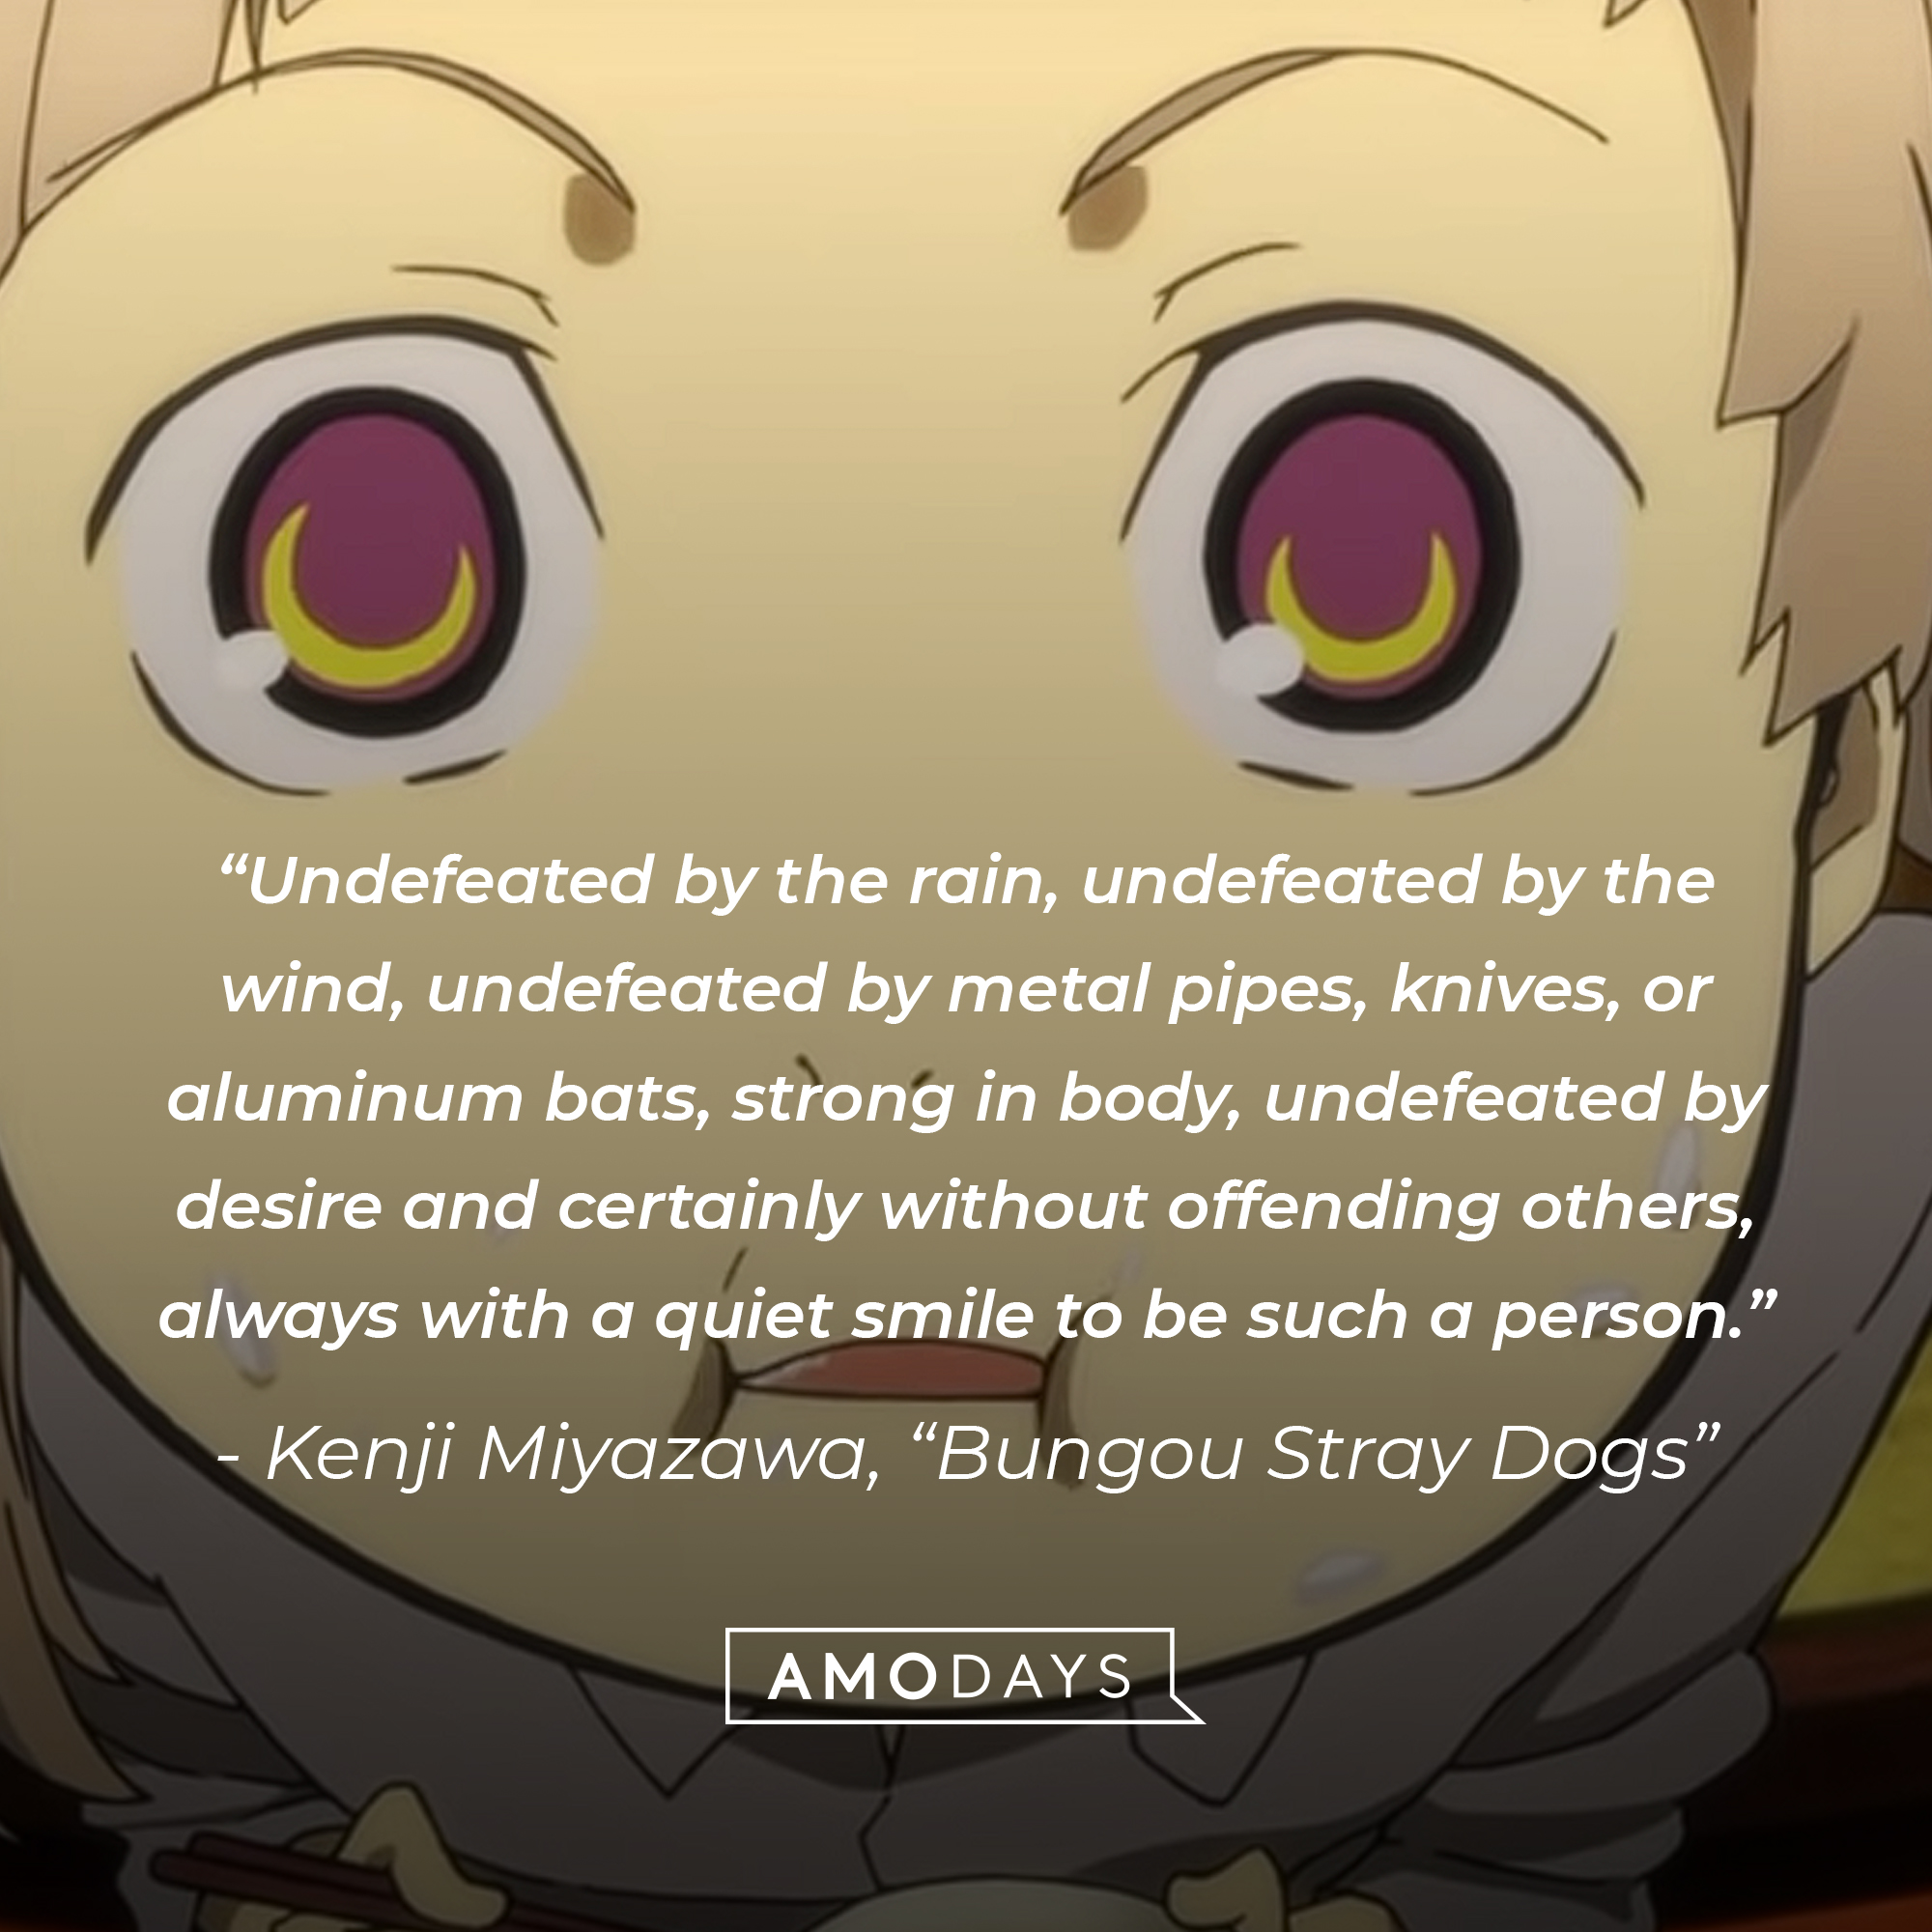 Kenji Miyazawa's quote: "Undefeated by the rain, undefeated by the wind, undefeated by metal pipes, knives, or aluminum bats, strong in body, undefeated by desire and certainly without offending others, always with a quiet smile to be such a person.” | Image: youtube.com/Crunchyroll Collection